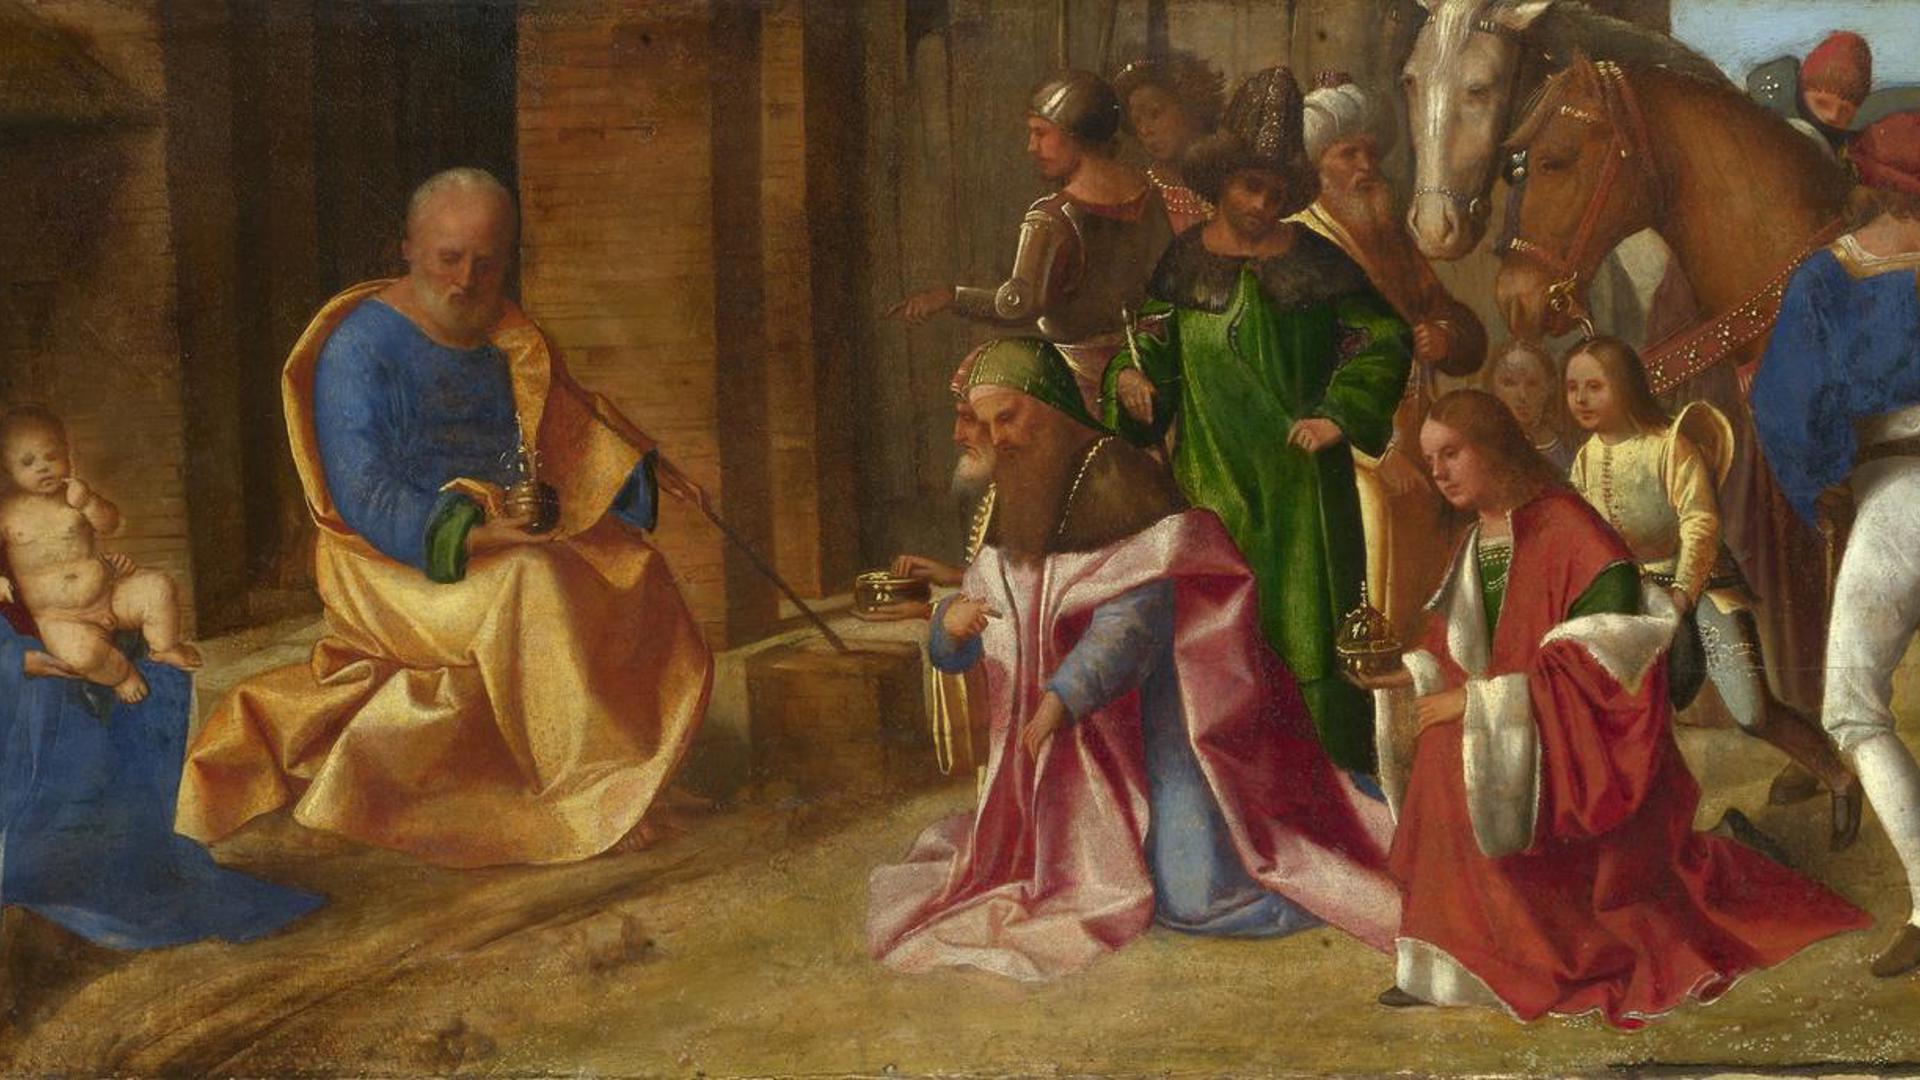 The Adoration of the Kings by Giorgione